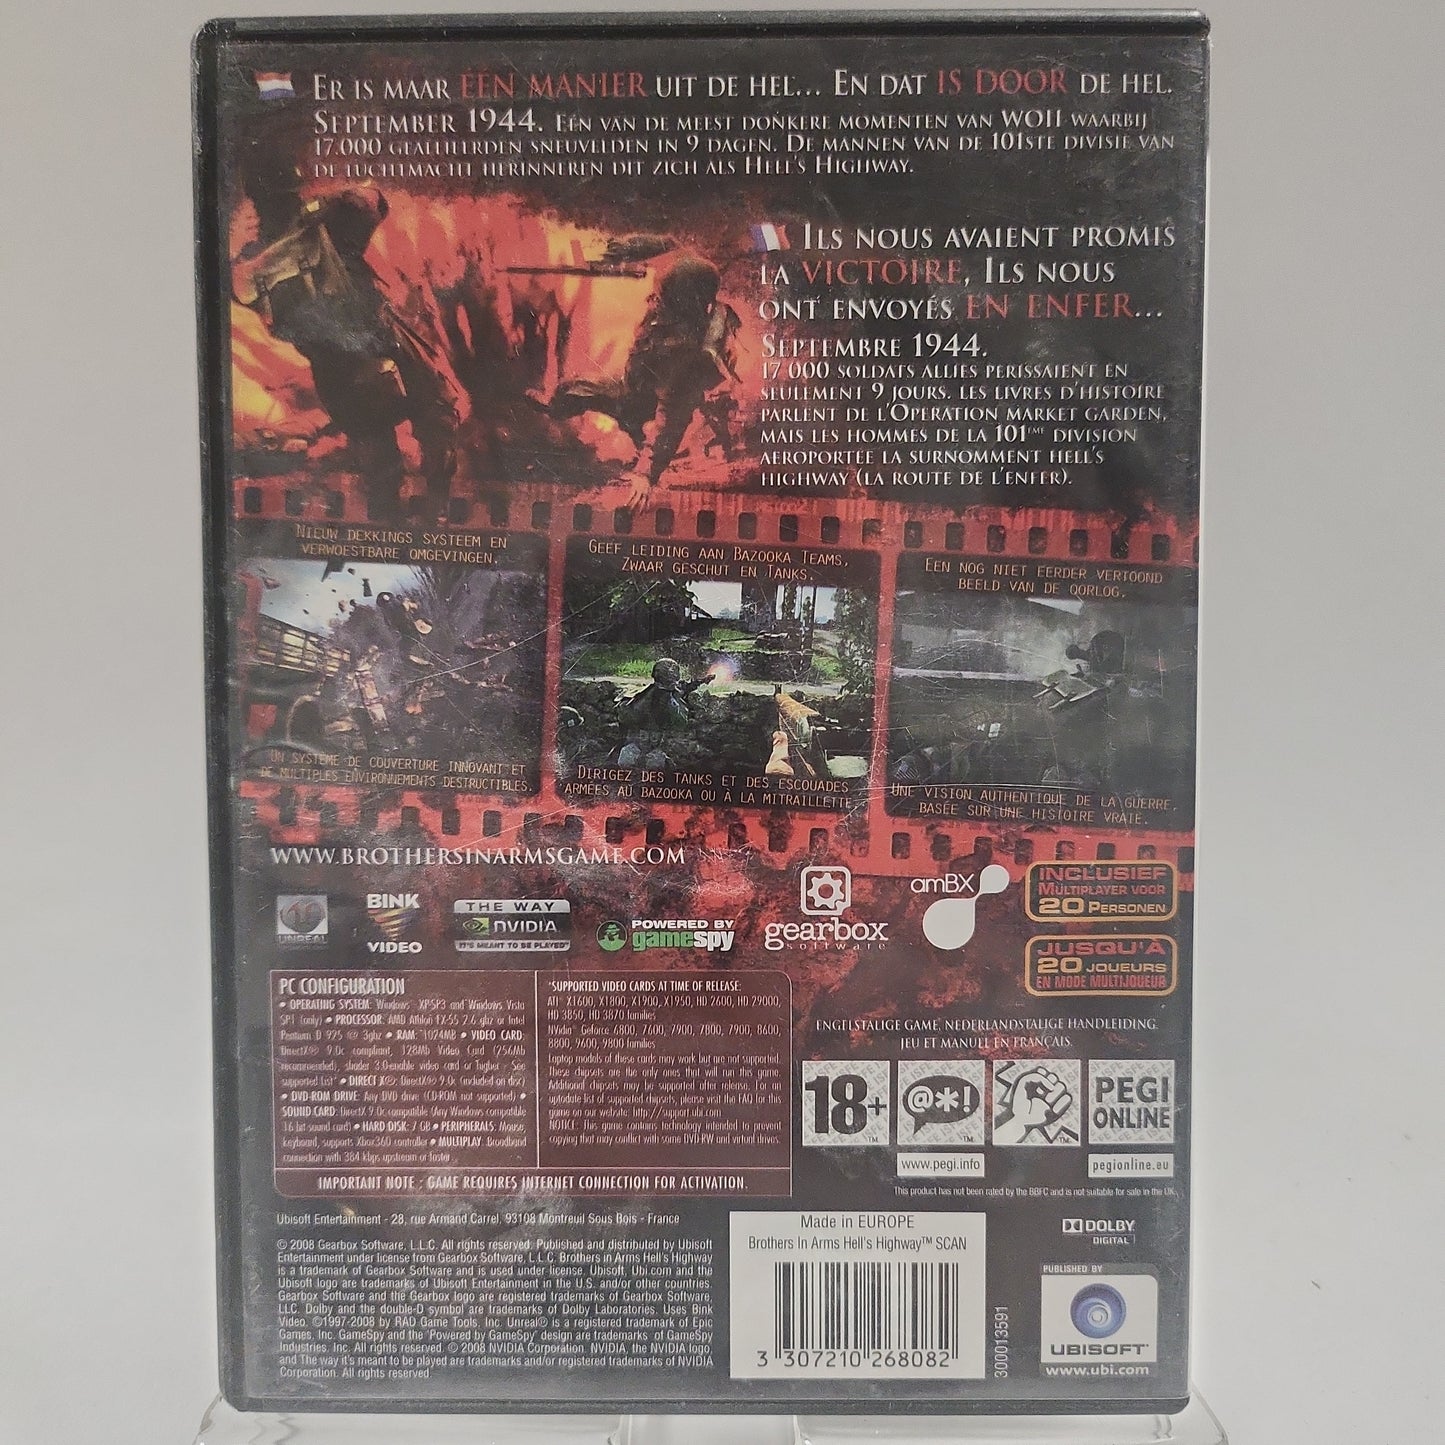 Brothers in Arms Hell's Highway PC